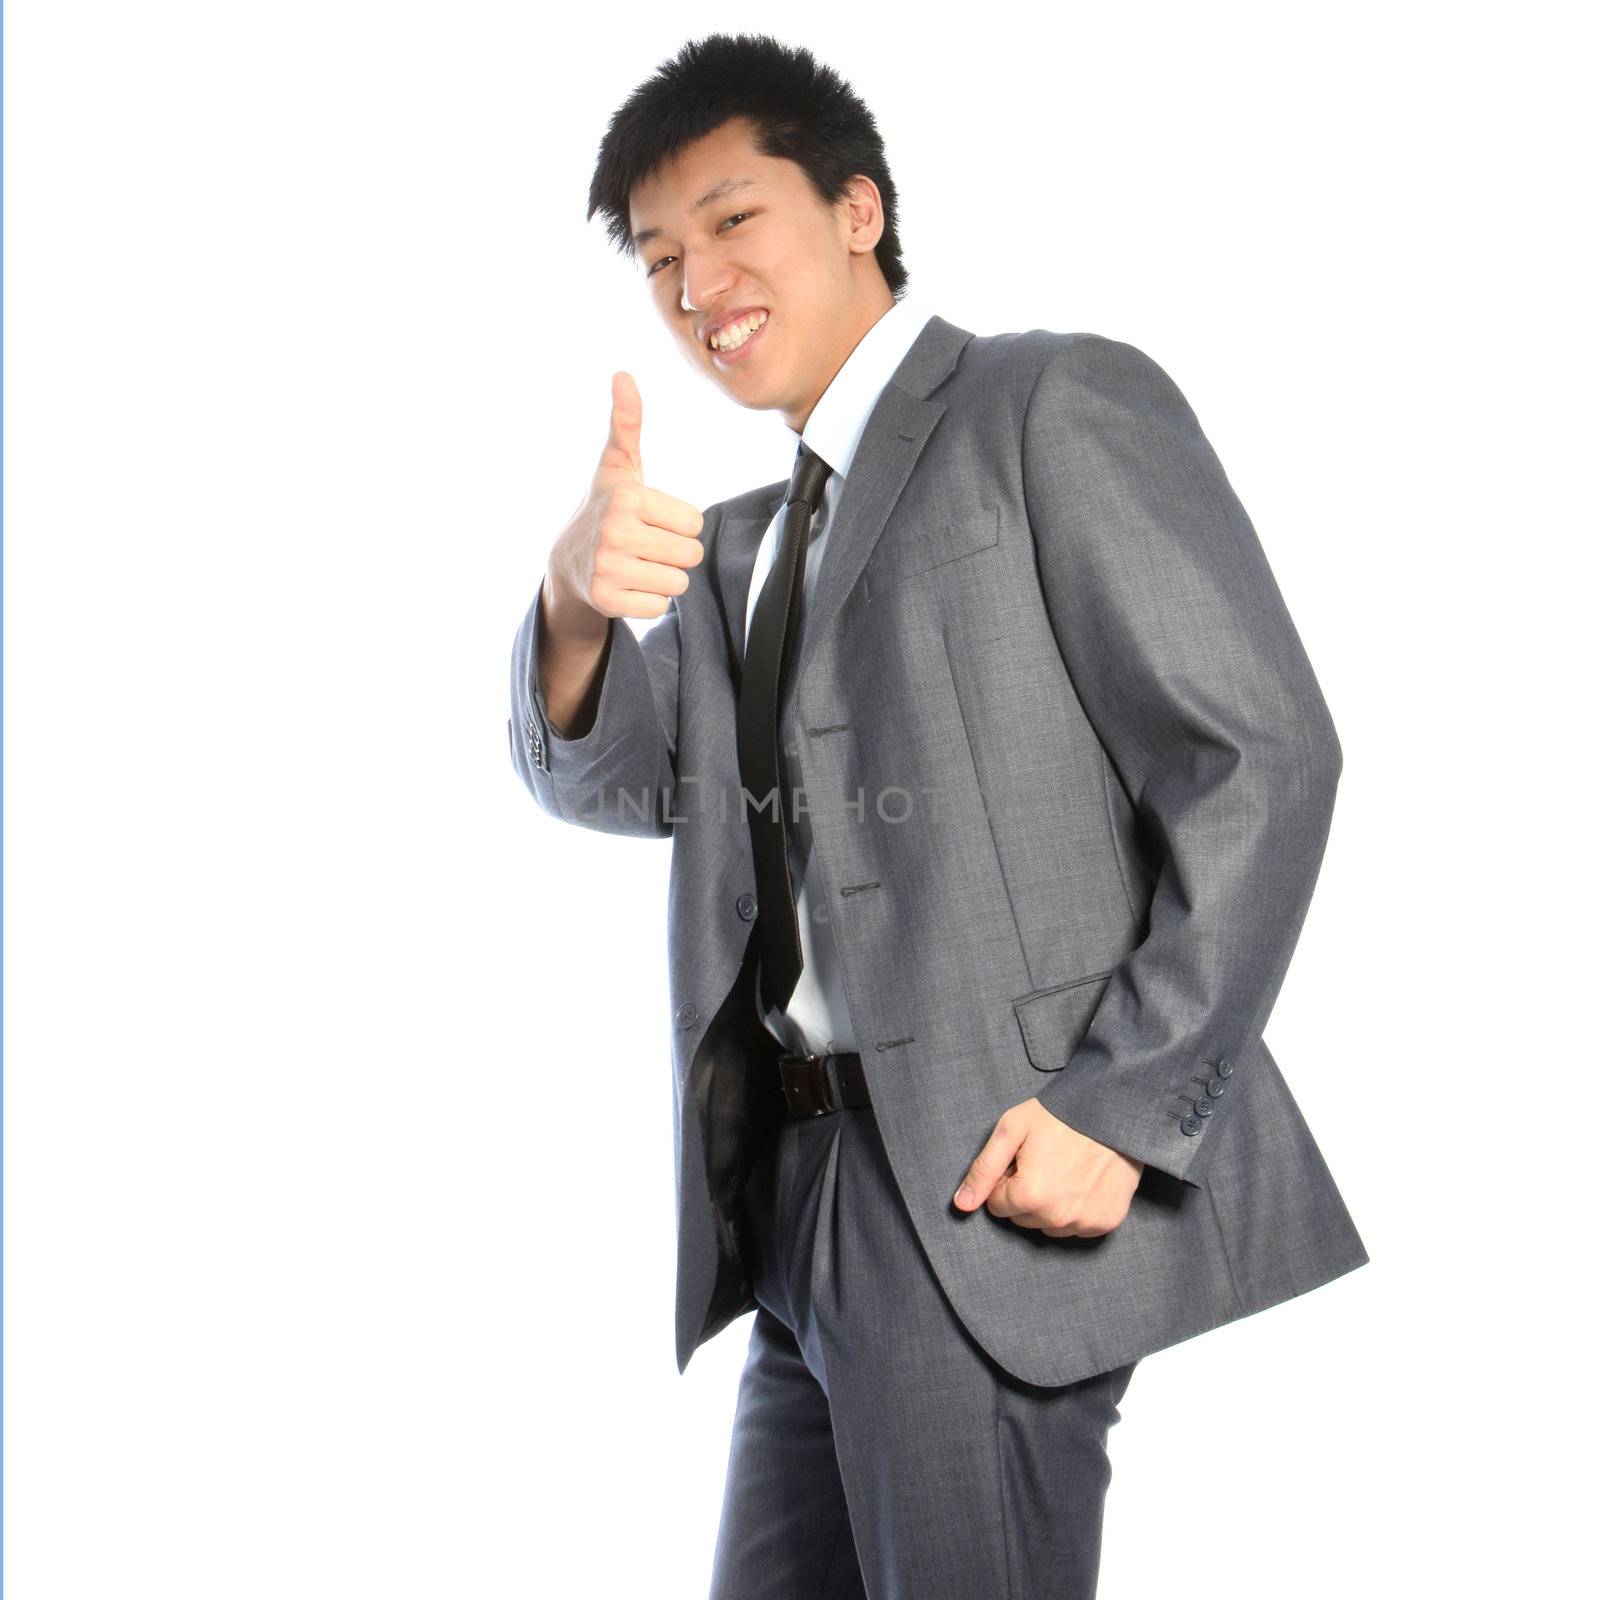 Successful Asian businessman giving thumbs up by Farina6000